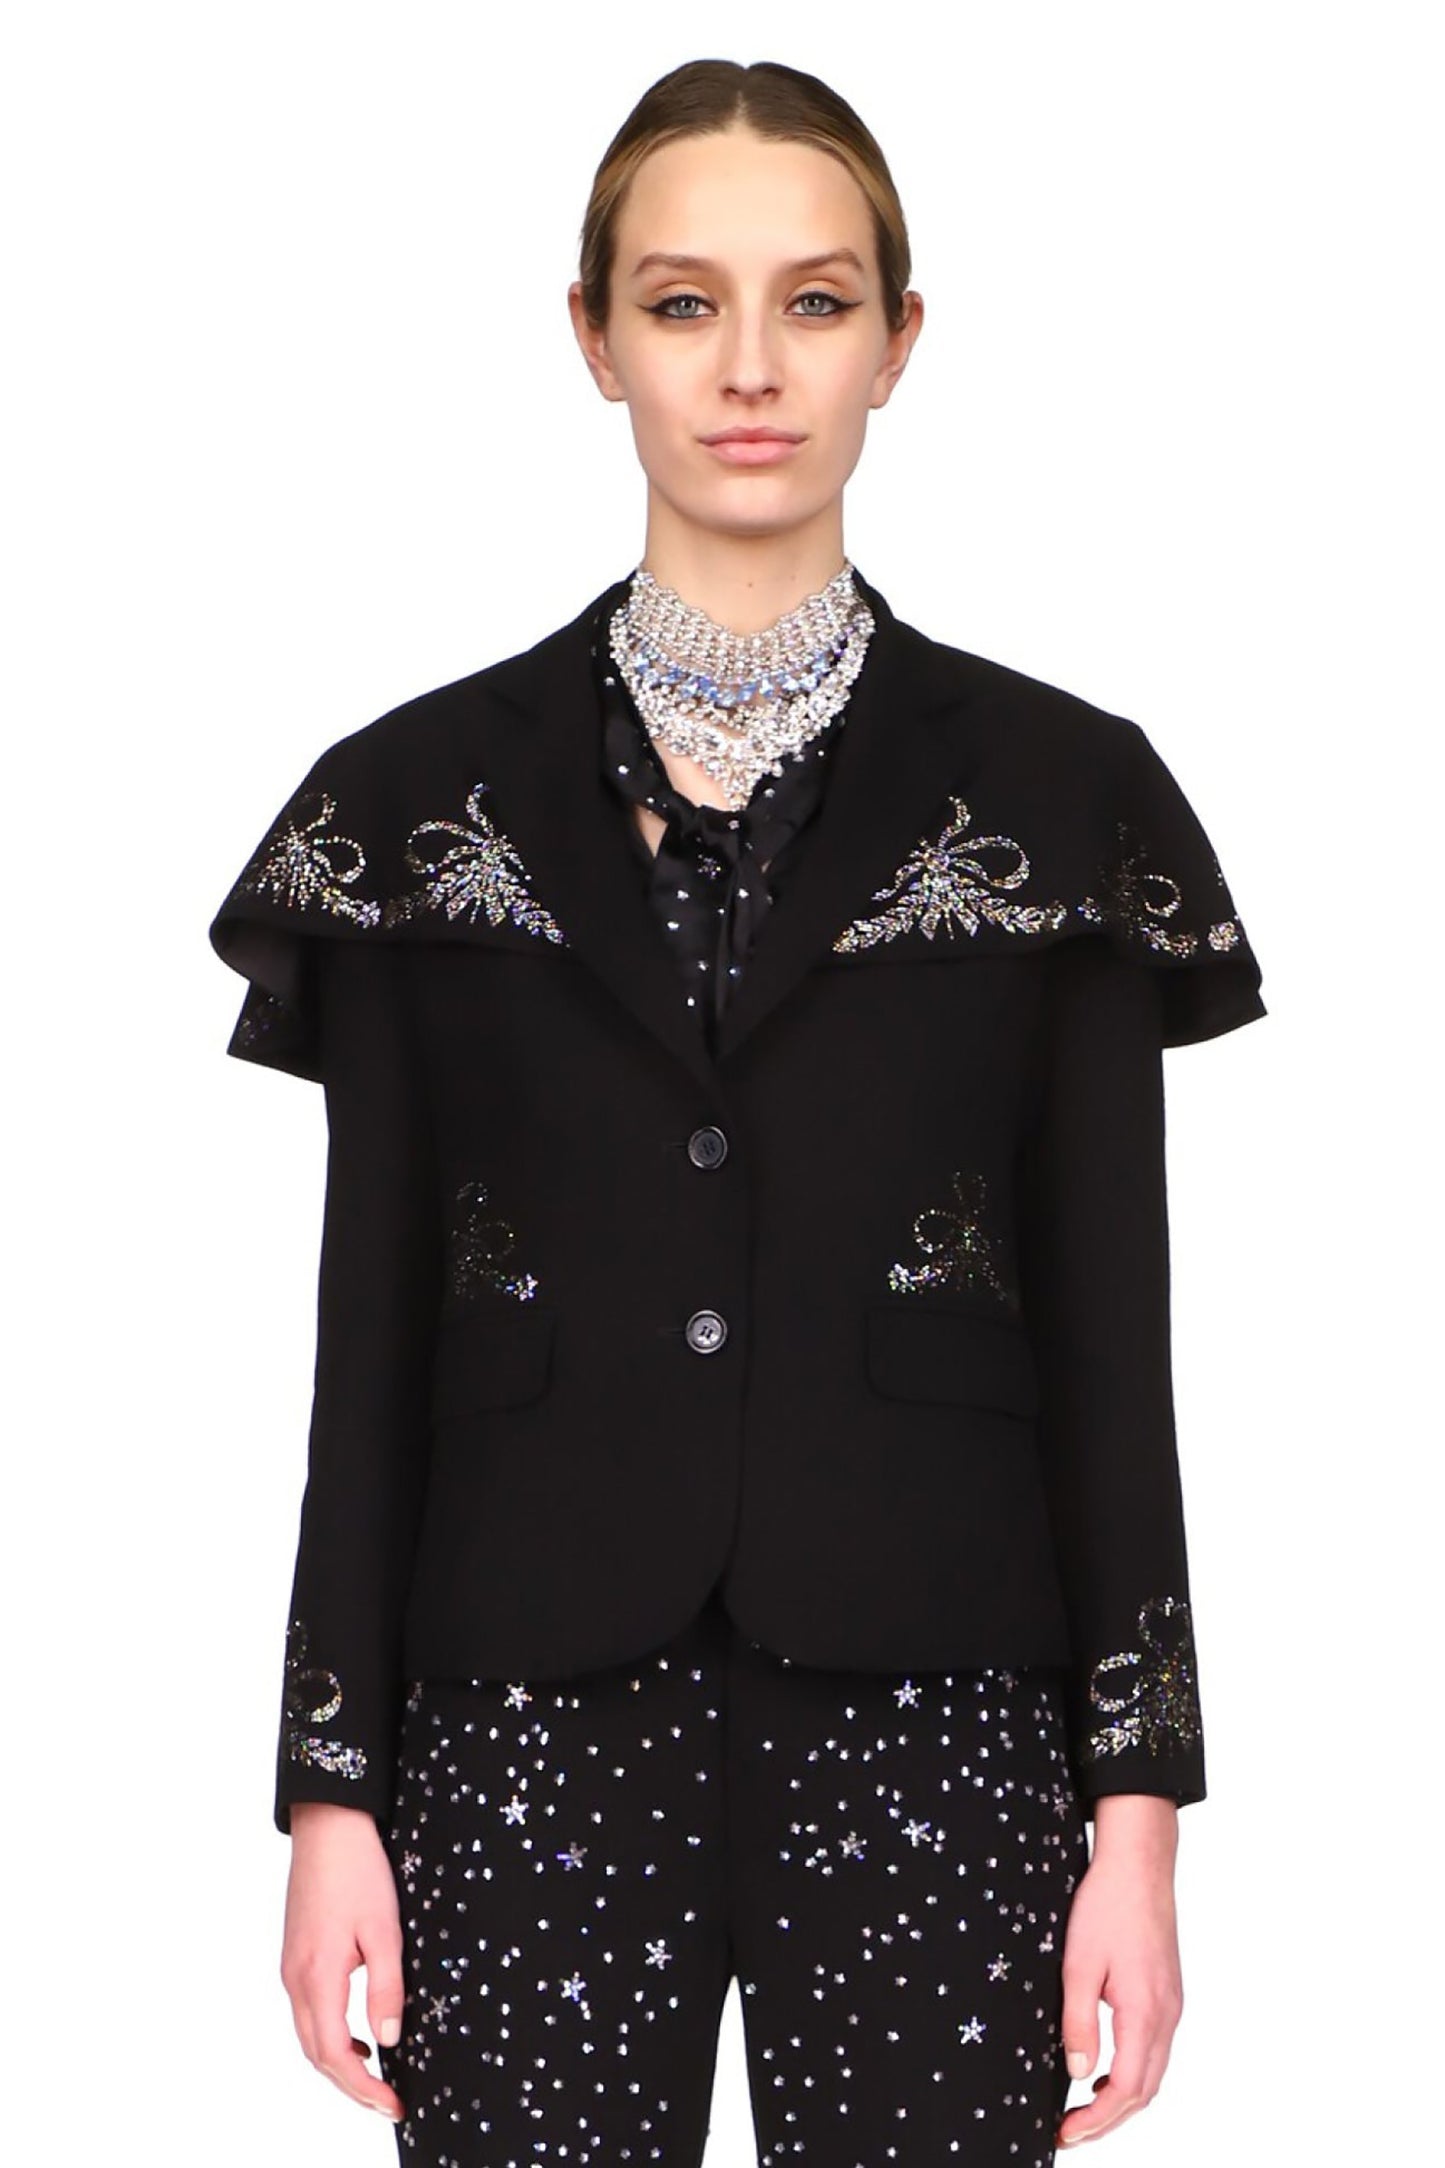 CRYSTAL 'GEORGIAN REVIVAL' CAPED JACKET WITH 'FORGET ME NOTS' - BLAZERS - Libertine